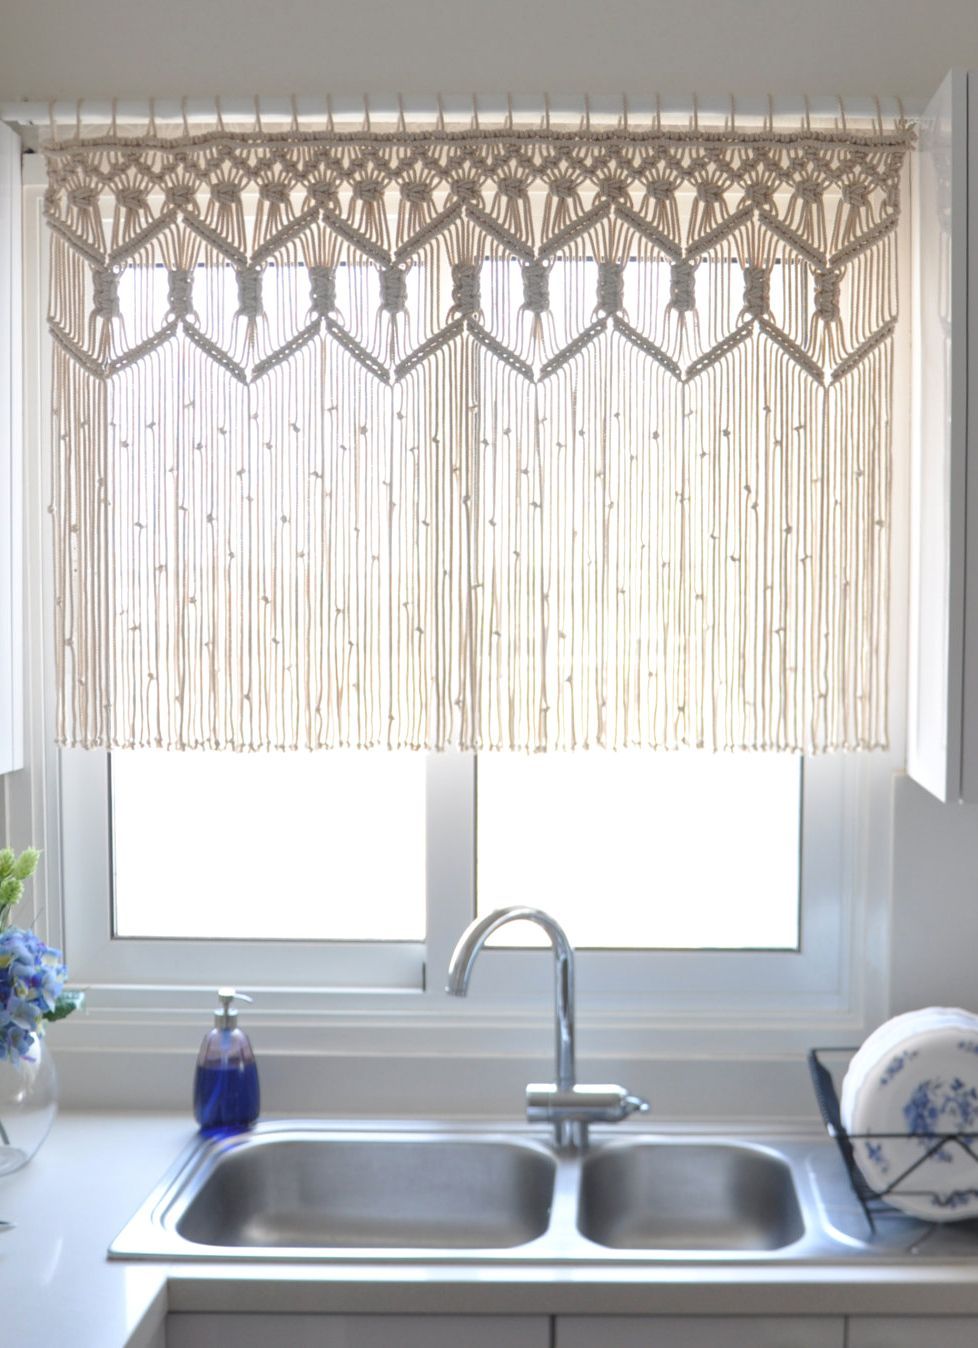 A dreamy macrame curtain is a pleasant addition to washing the dishes